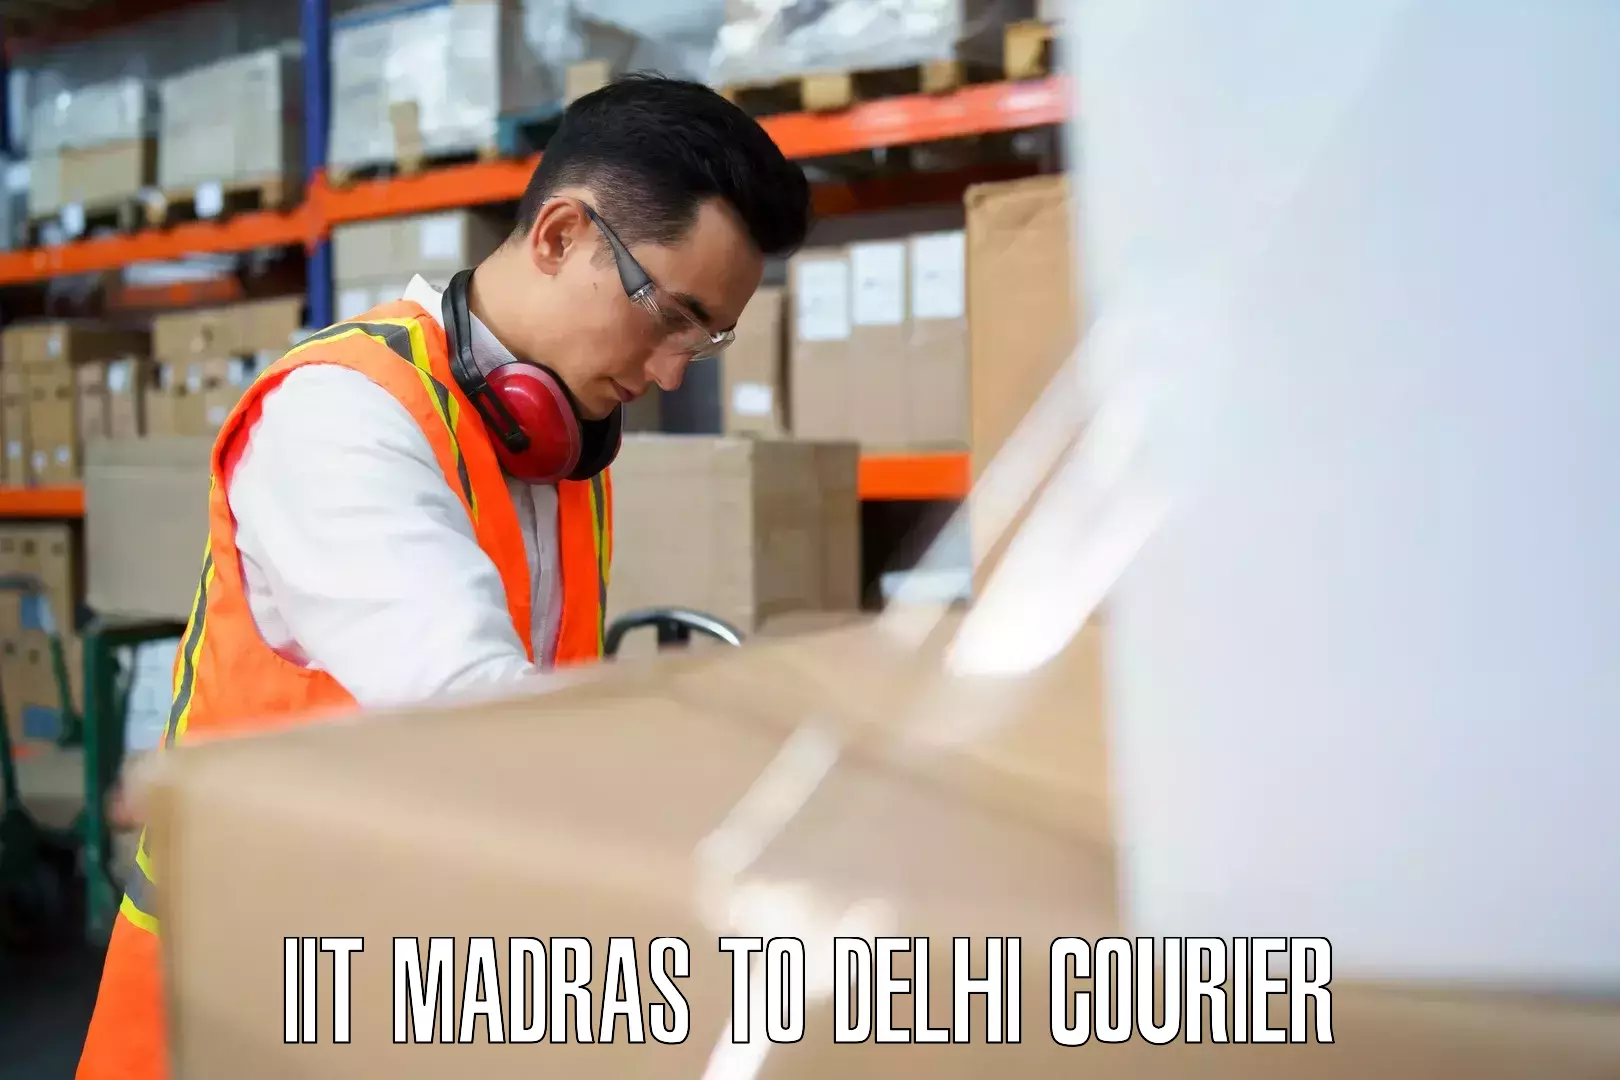 Luggage shipment specialists IIT Madras to Jhilmil